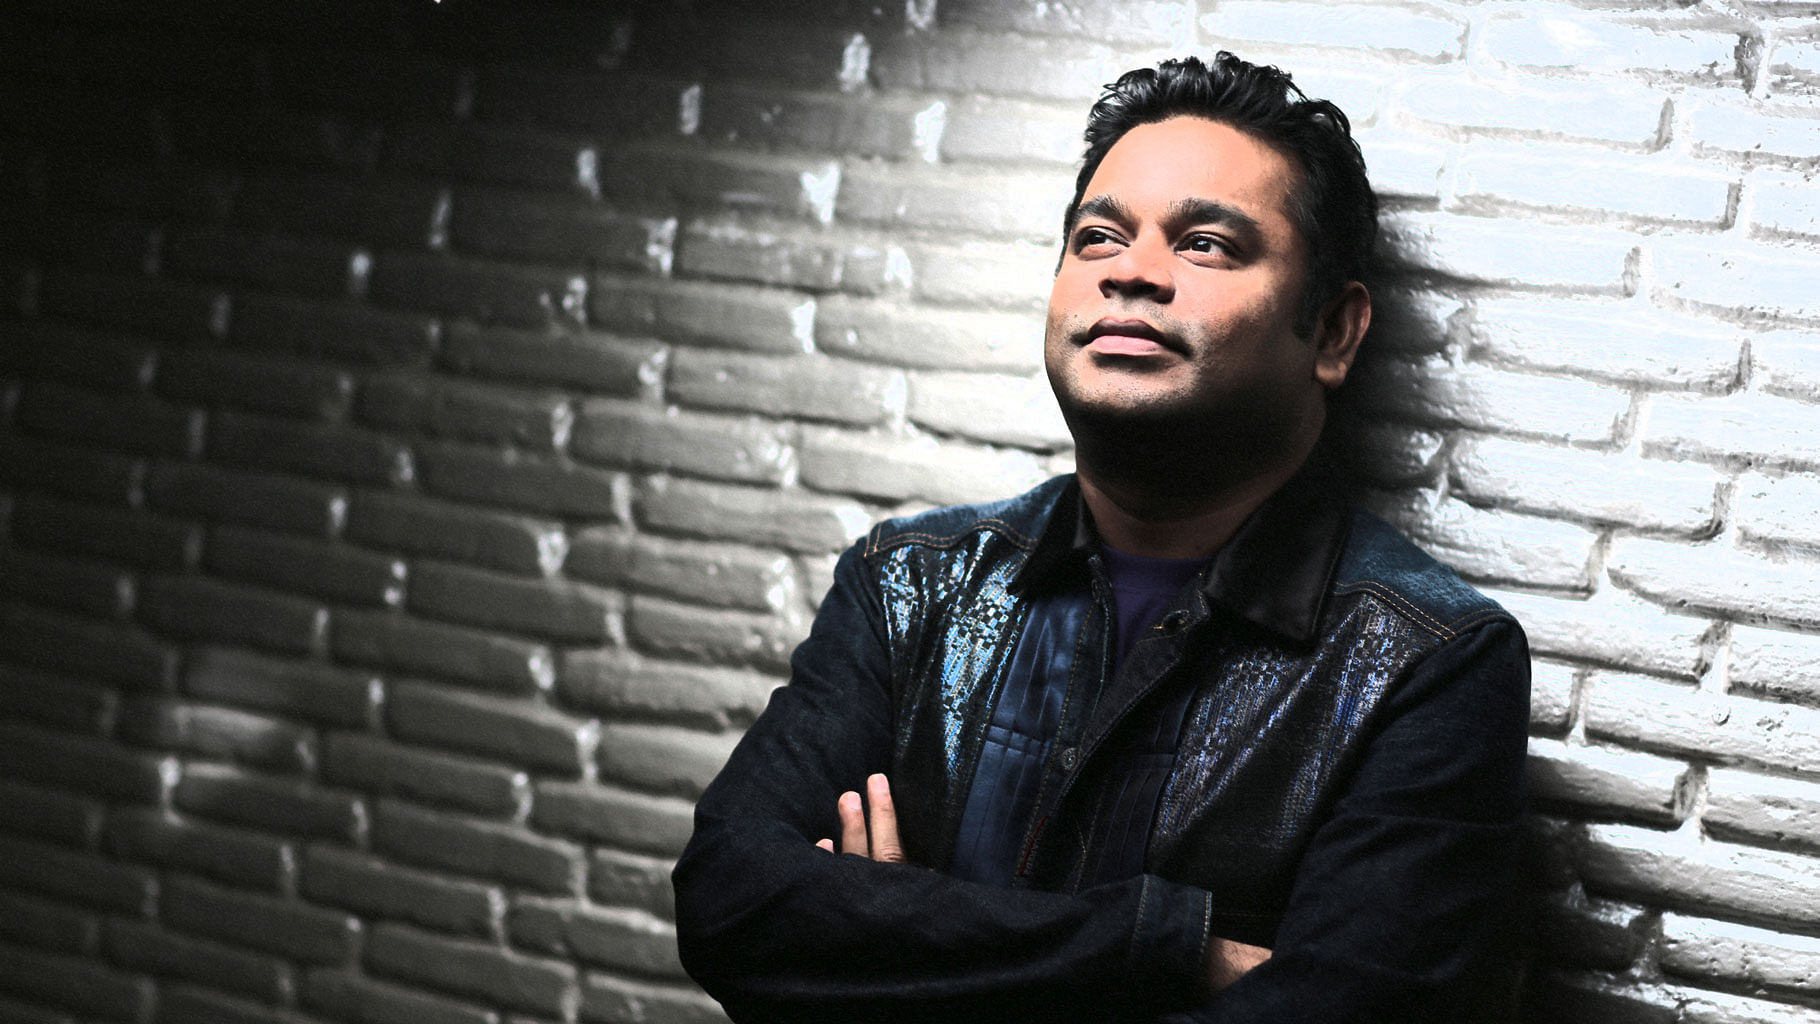 AR Rahman talks about staying humble and staying passionate in his Twitter chat with fans (Photo: Twitter/<a href="https://twitter.com/igtamil">@igtamil</a>, altered by The Quint)